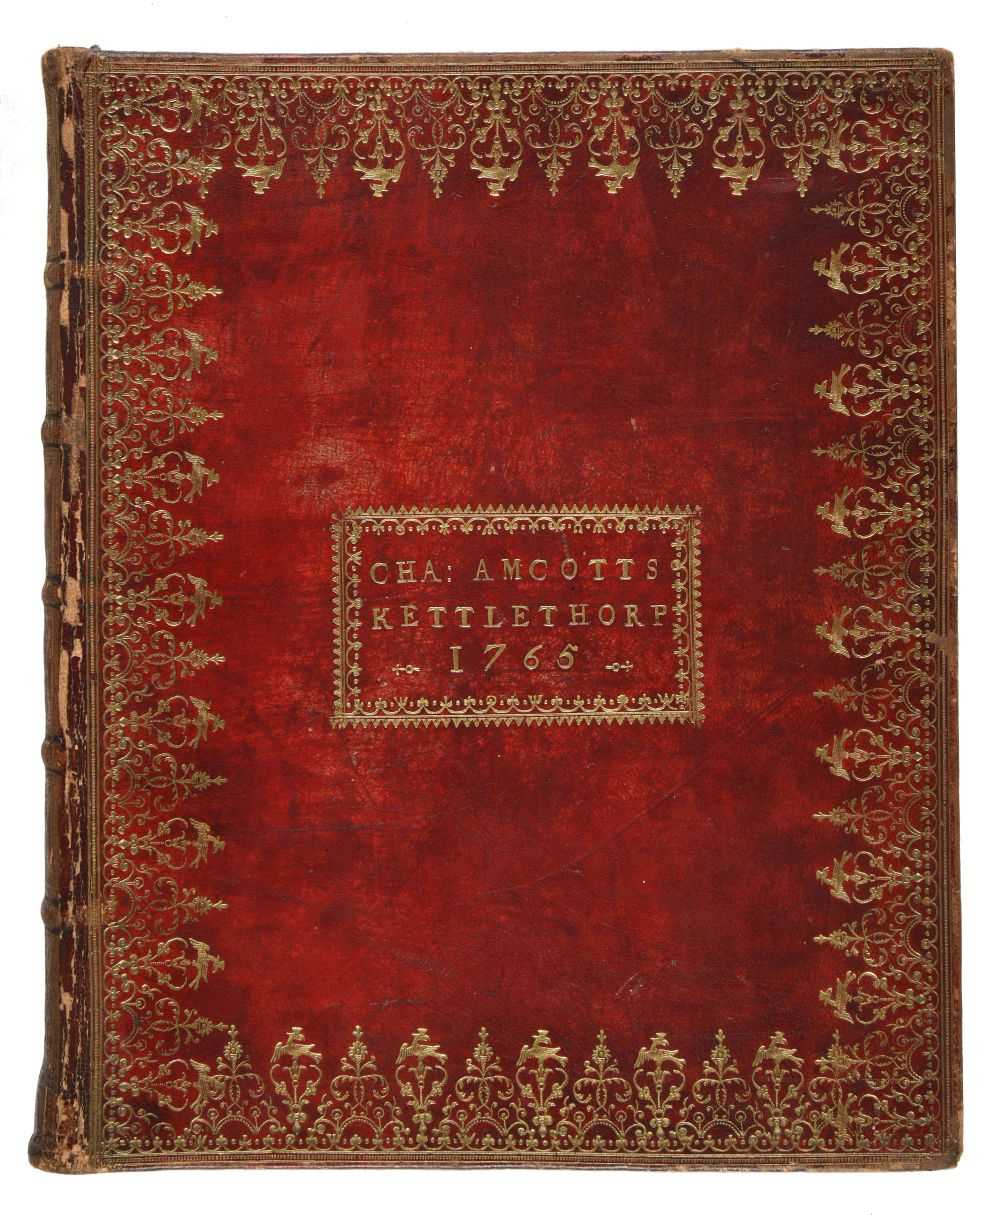 Lot 403 - The Book of Common Prayer..., 1758